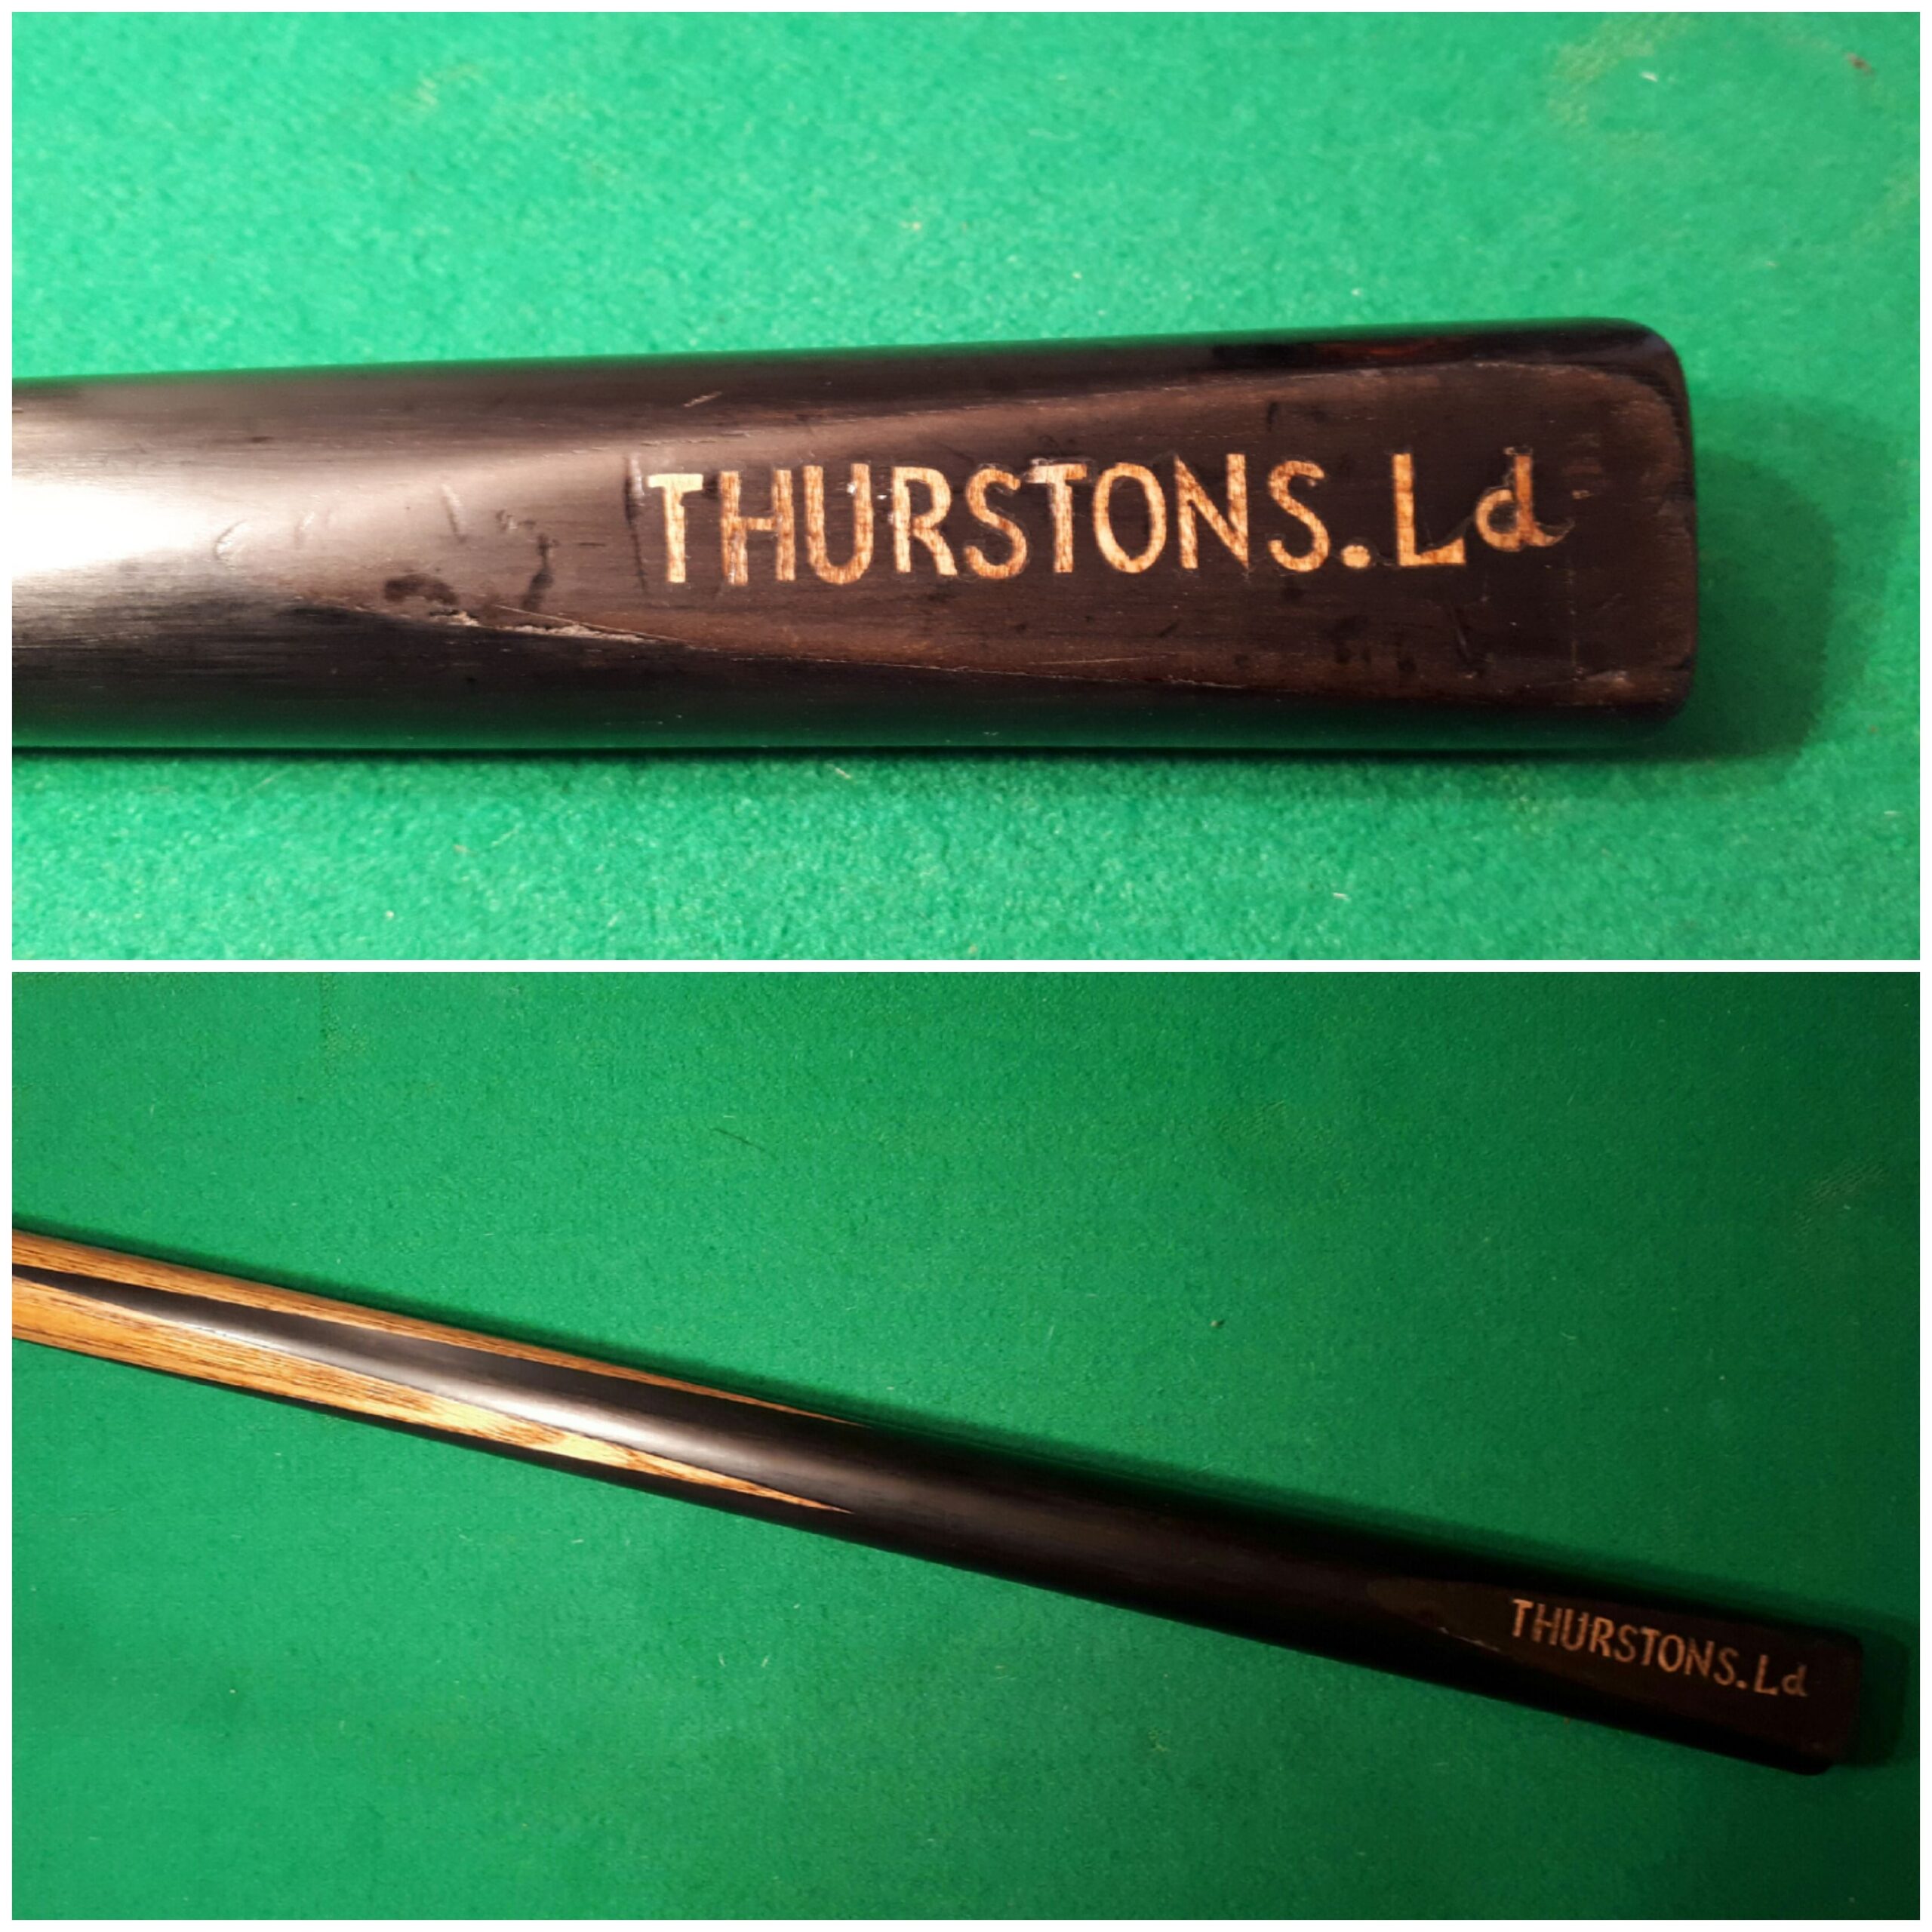 Thurstons cue